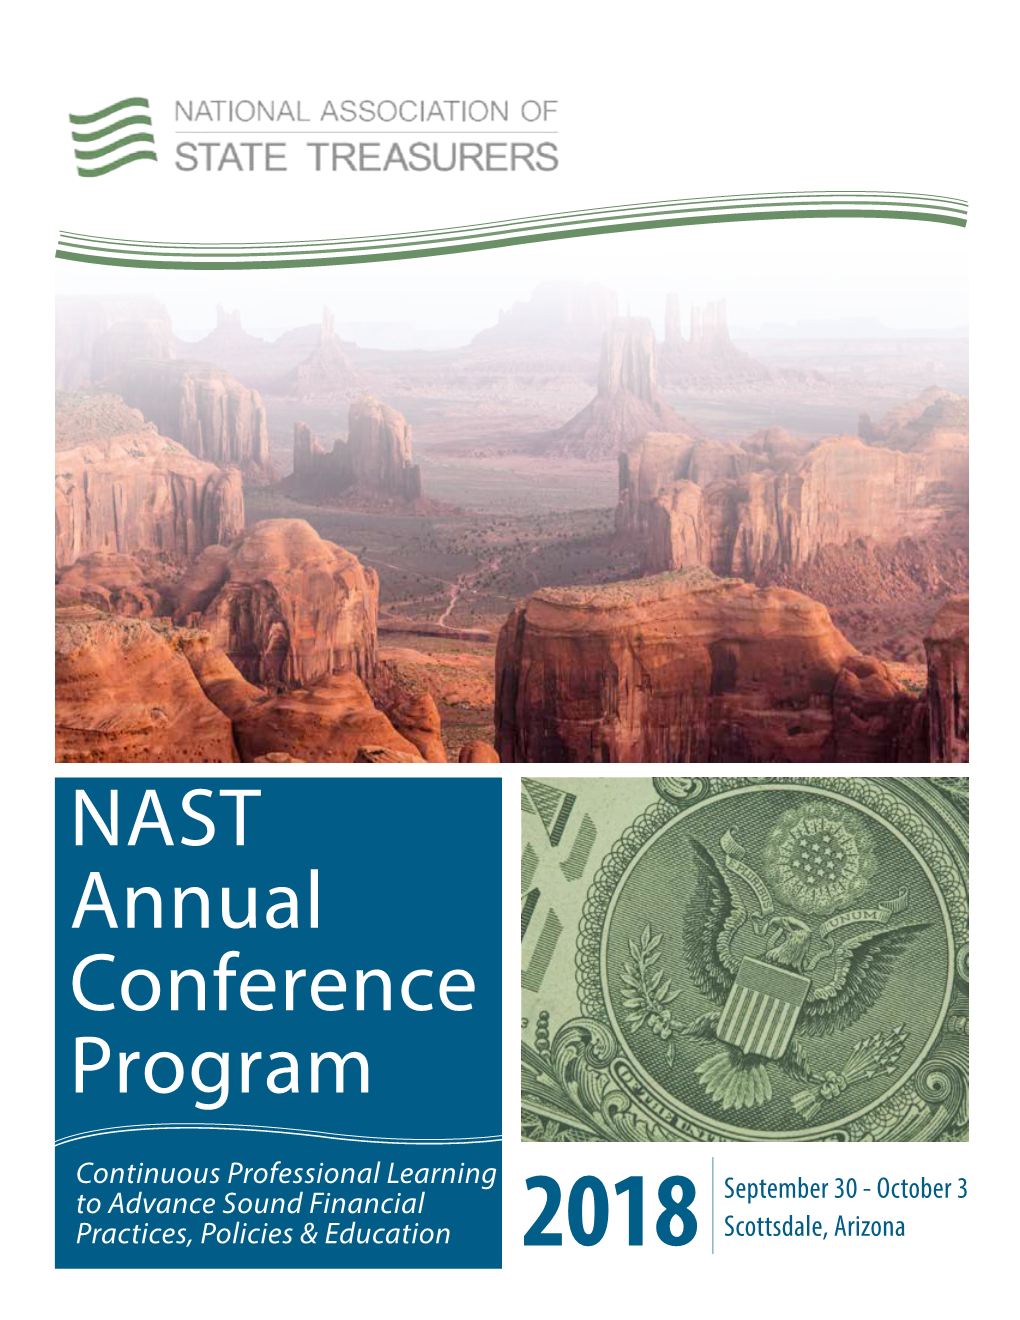 NAST Annual Conference Program